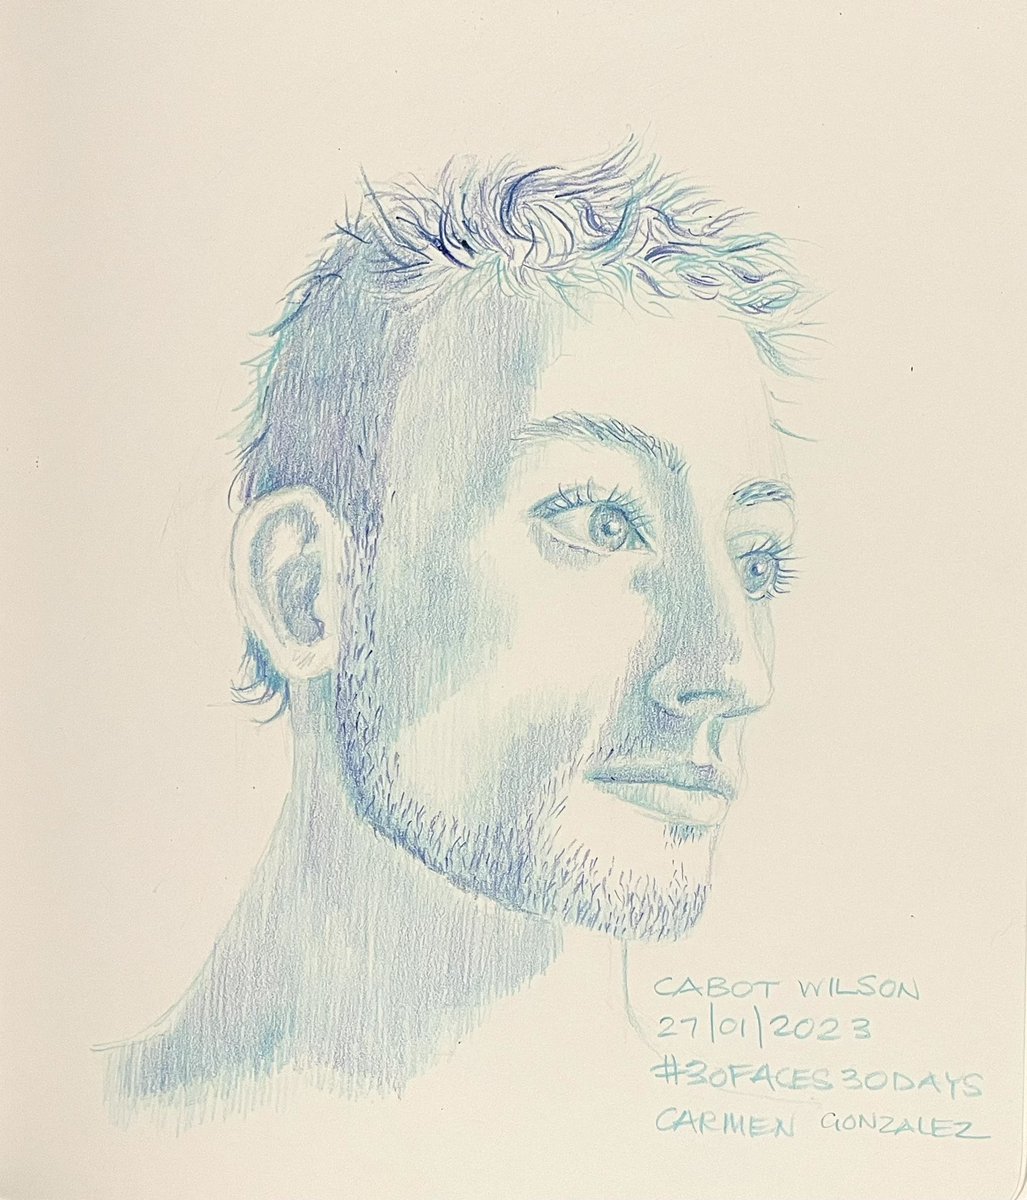 #30Faces30Days 2023 with @sktchy - Day 27
Instead of the blue Bic shown in the tutorial, I decided to go with a blue mechanical pencil for this portrait with some added darker blue. A very tricky angle to draw but the muse Cabot Wilson from @museumbysktchy has amazing eyes!